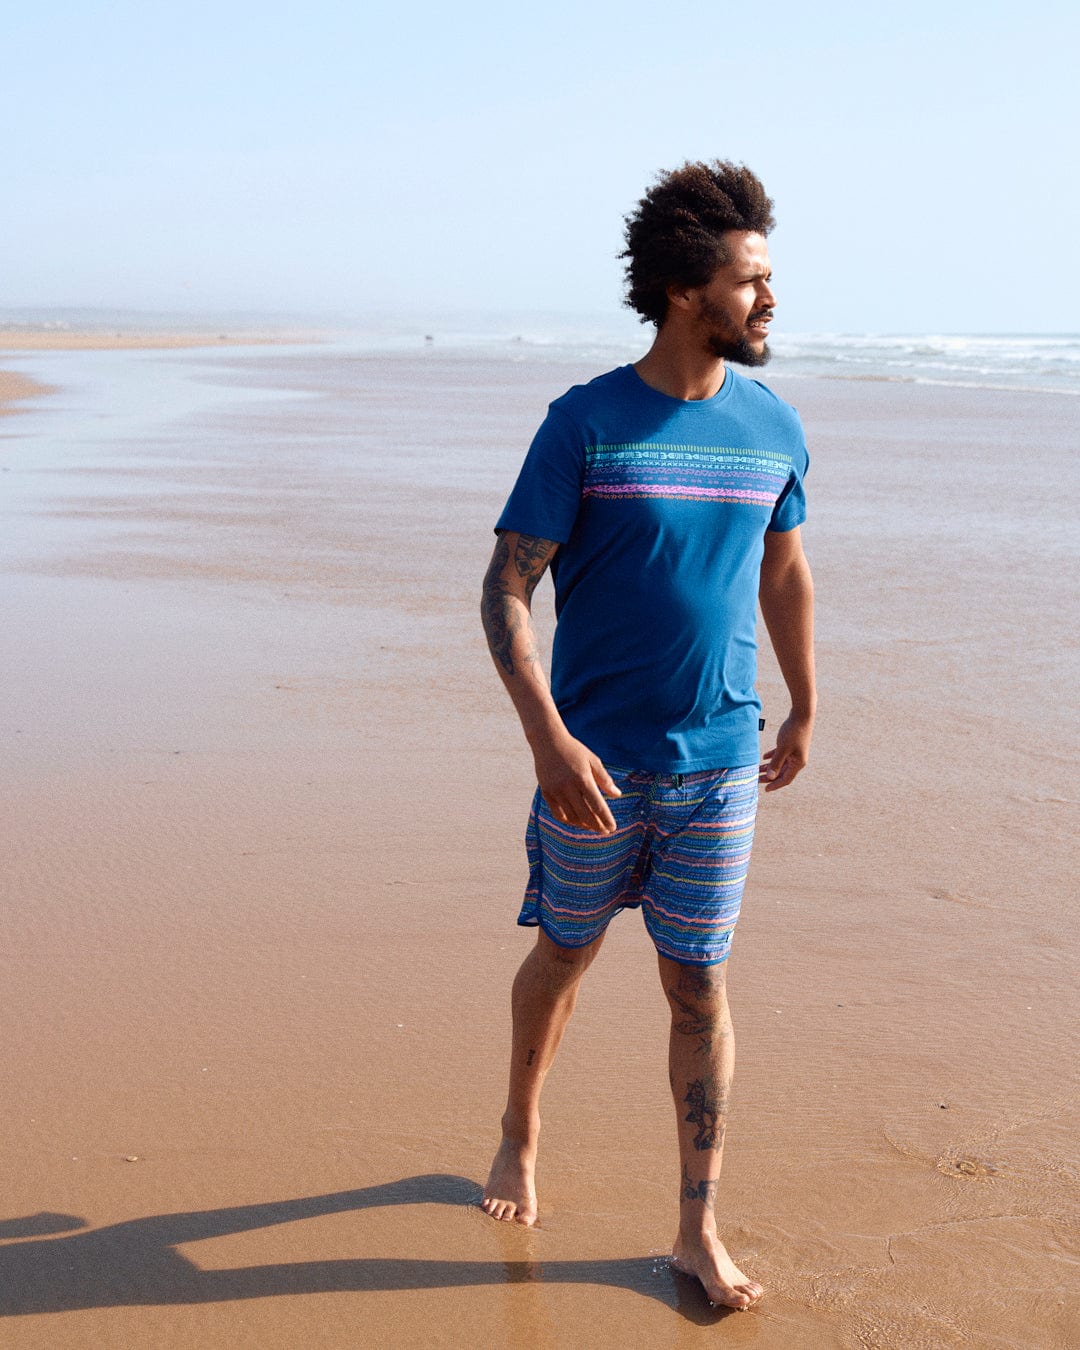 A man in a Saltrock Marks Chest - Mens Short Sleeve T-Shirt in Blue with crew neckline and striped shorts standing on a sandy beach, looking to the side, with ocean waves in the background.